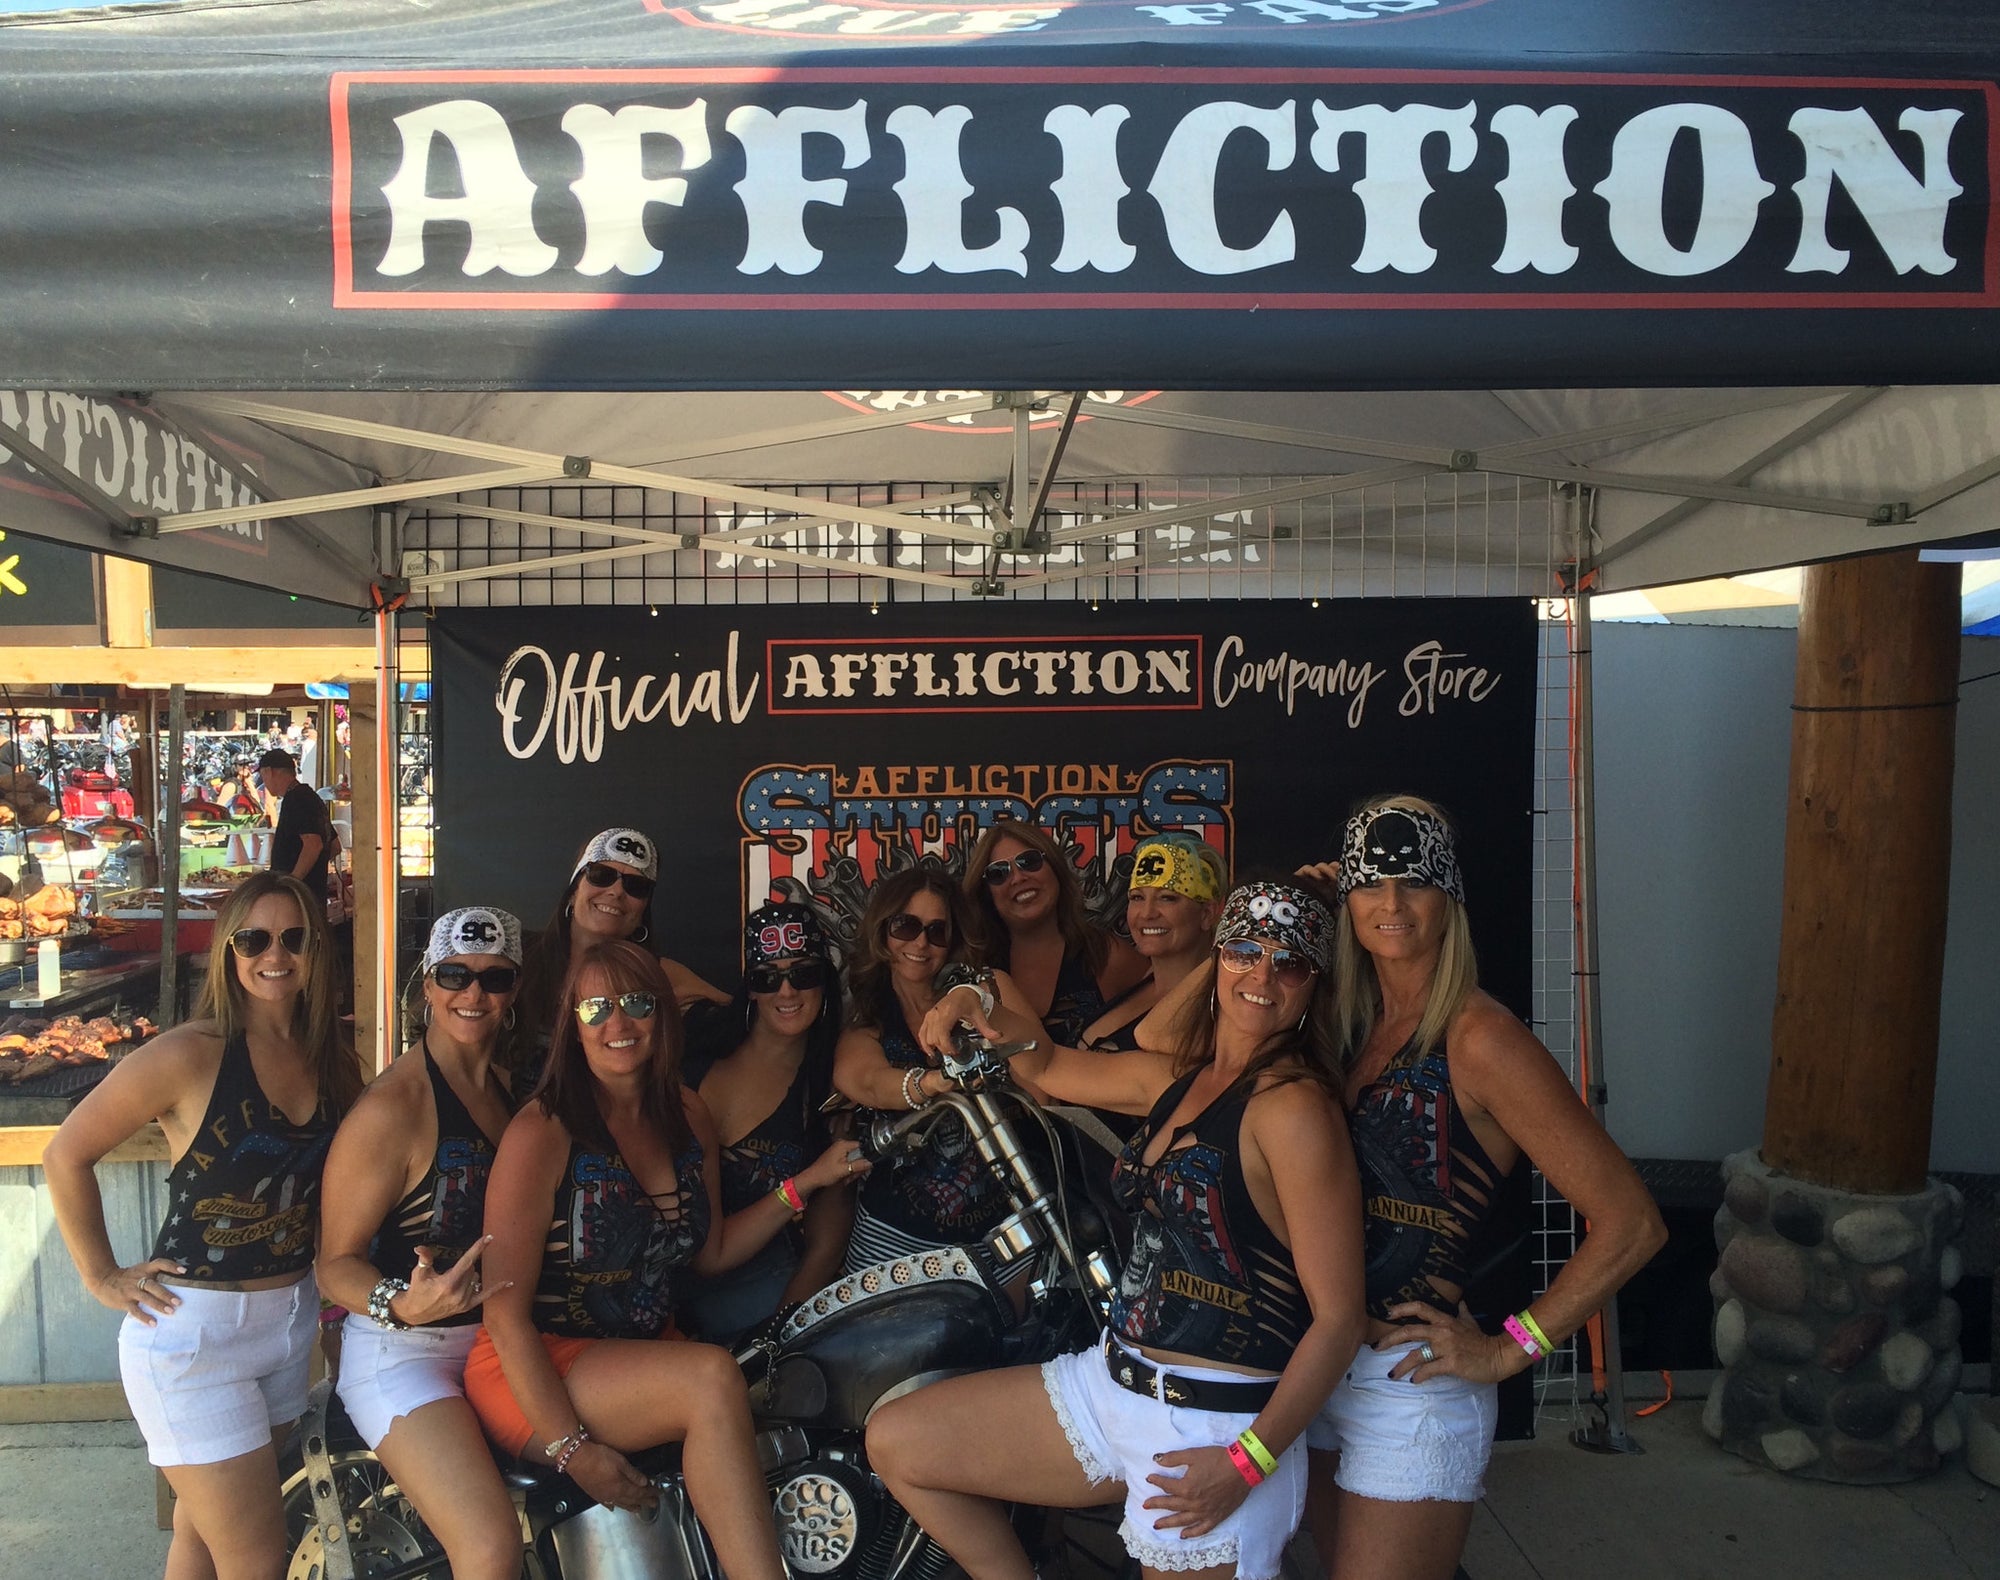 The 76th Annual Sturgis Rally